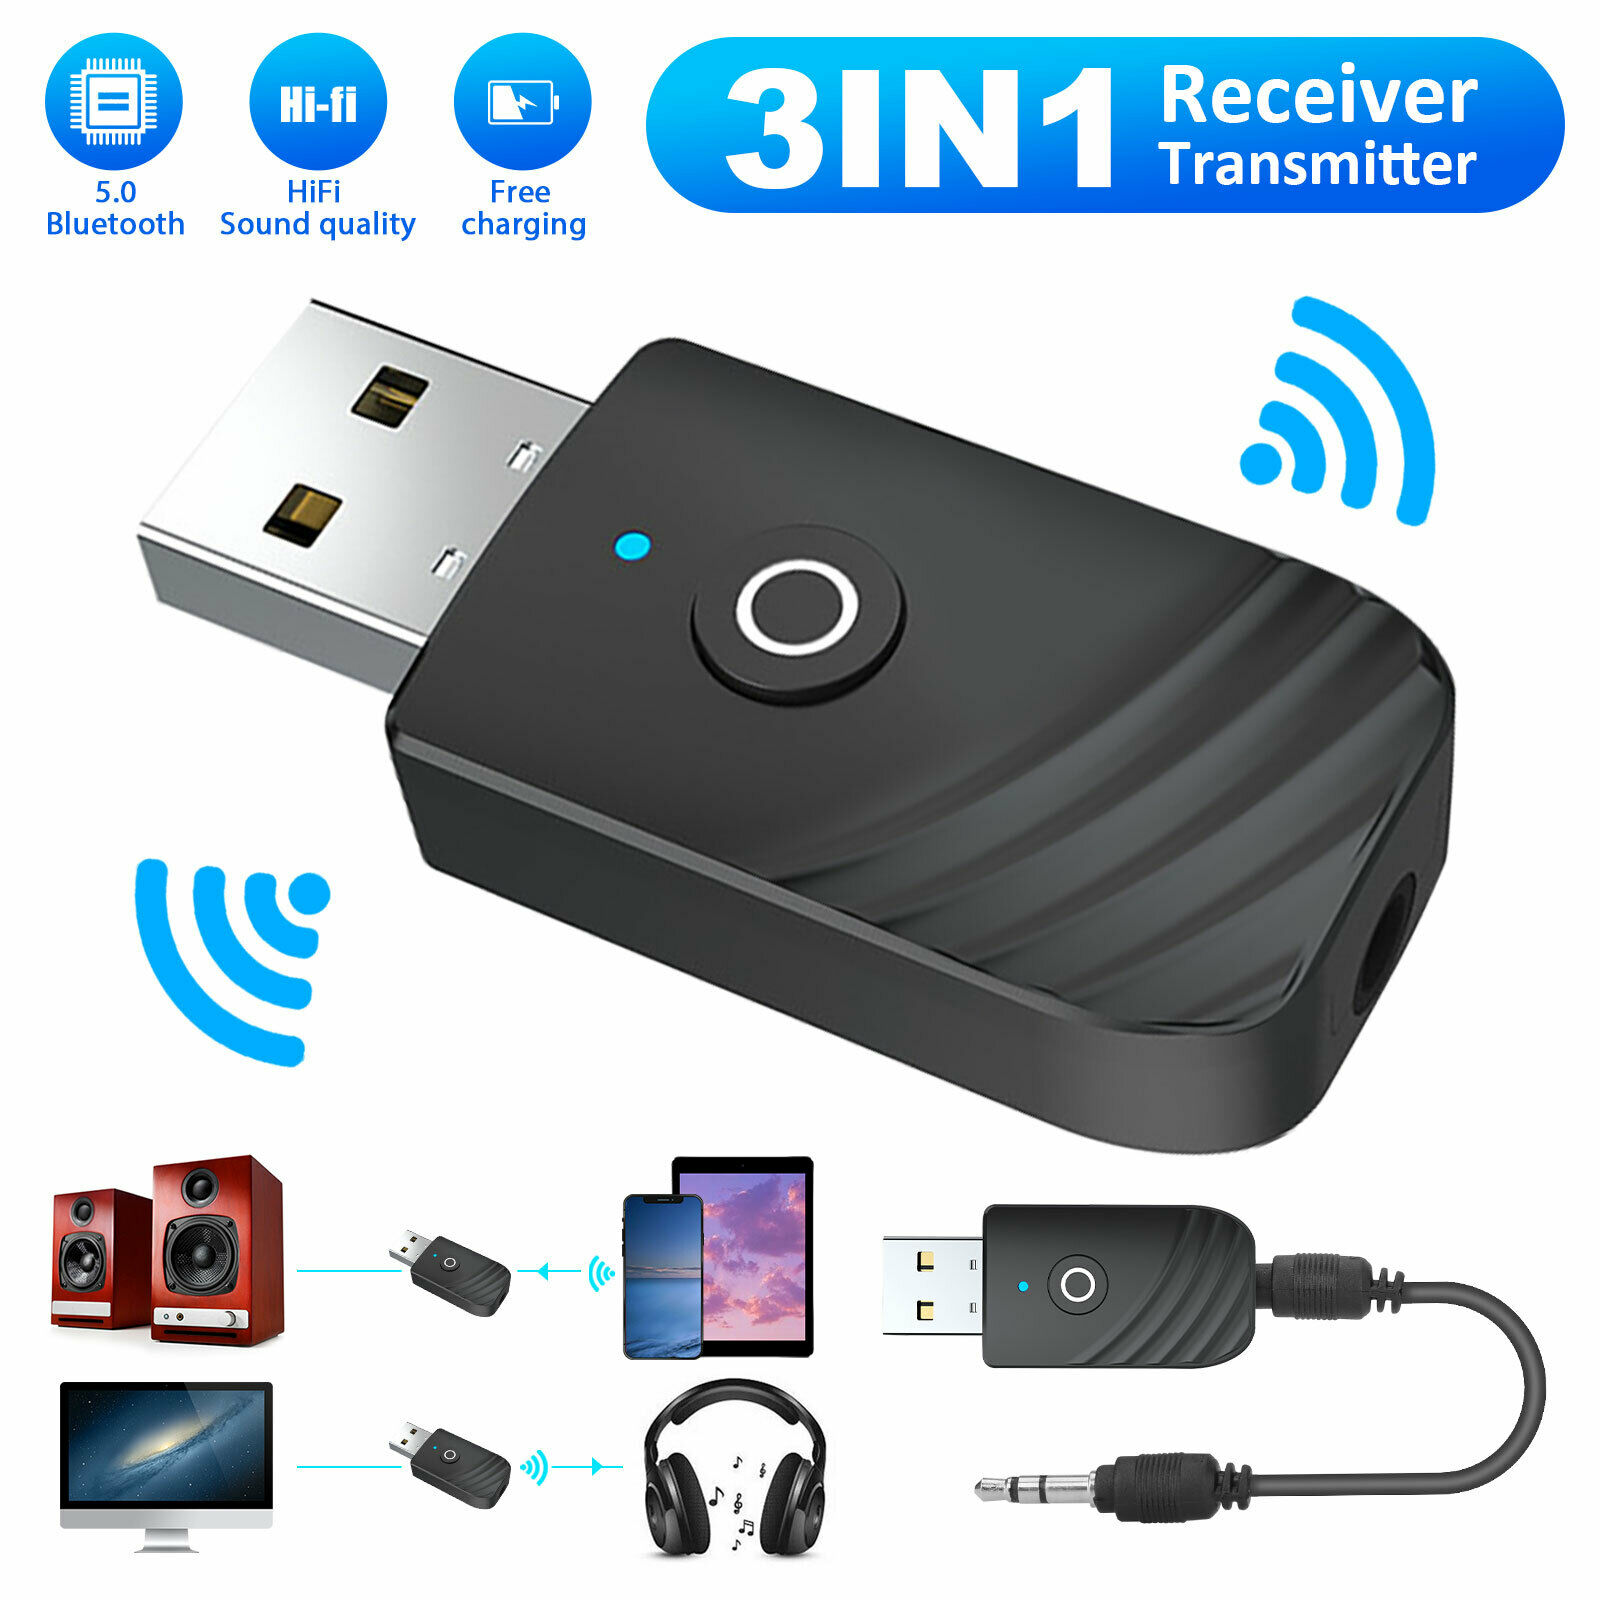 SY319-Wireless-USB-Bluetooth-50-Audio-Transmitter-Receiver-3-In-1-Adapter-For-TV-PC-Car-1850380-1